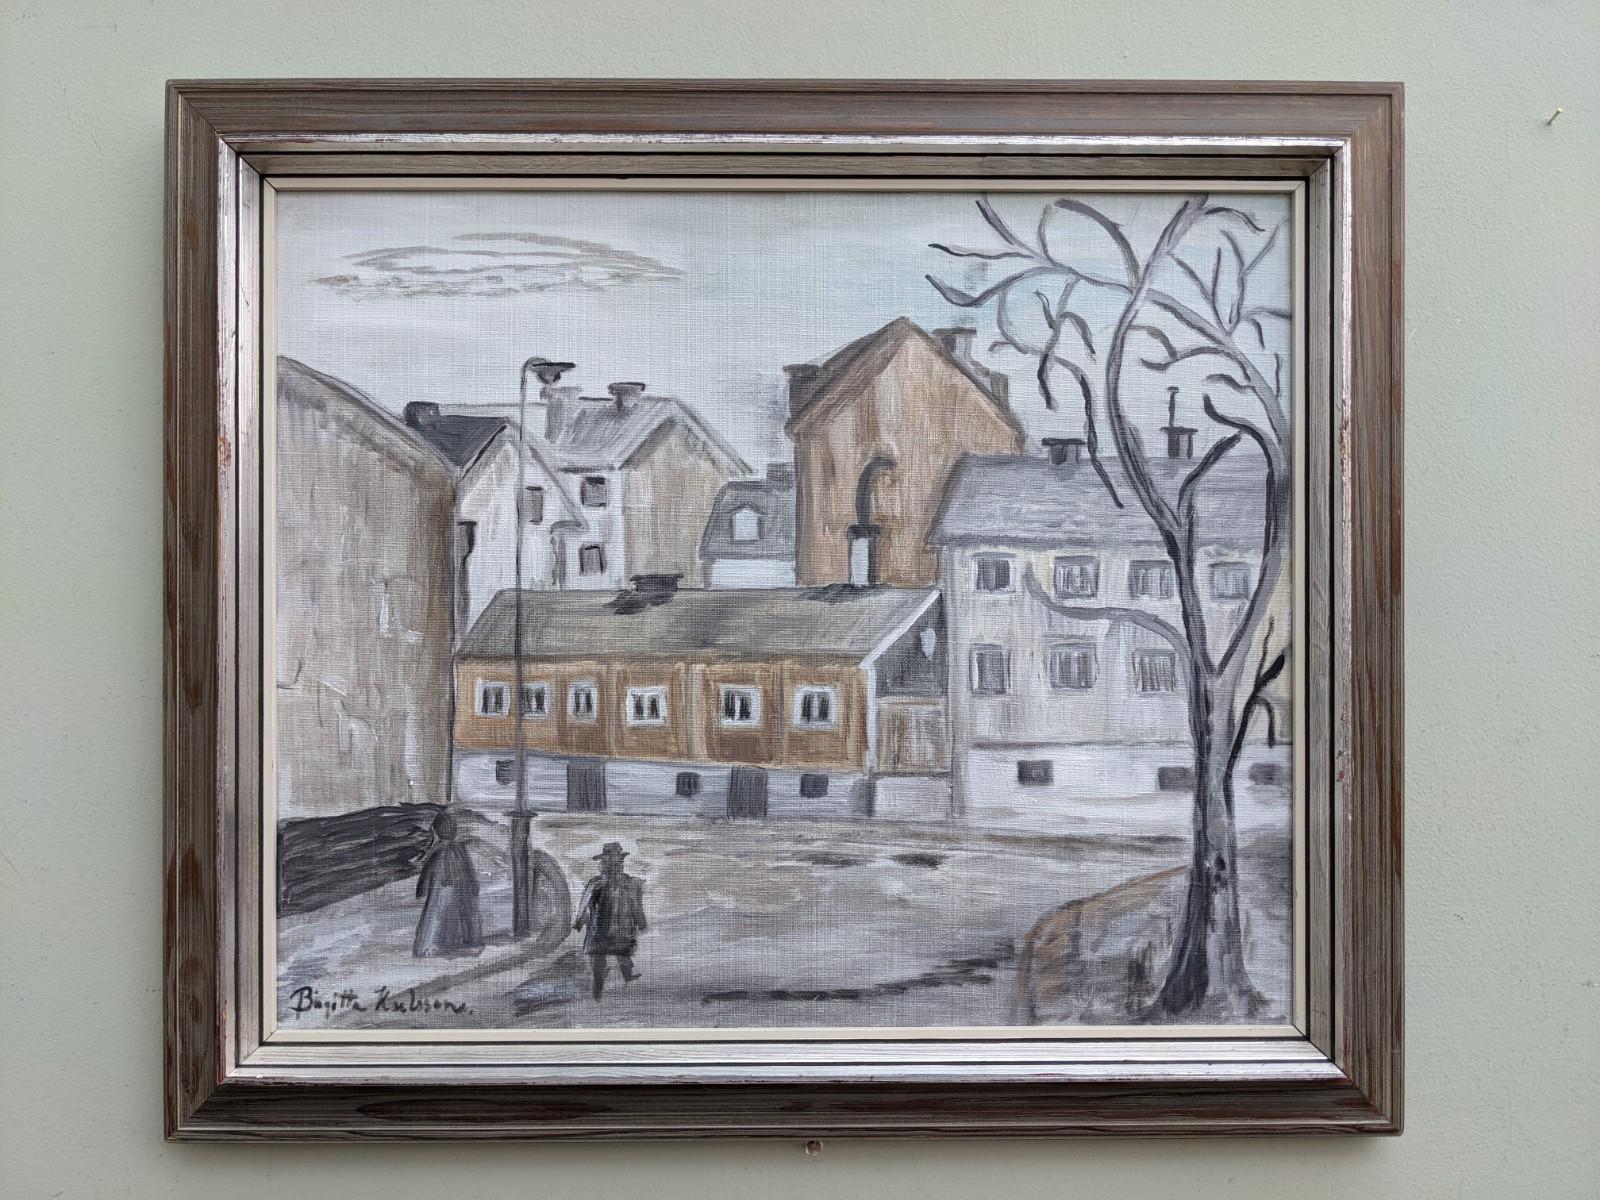 STROLL
Size: 47 x 55 cm (including frame)
Oil on Canvas

An expressive mid century modernist street scene composition, executed in oil onto canvas.

Working under a  mostly monochrome palette, this artwork presents 2 figures walking through a quiet